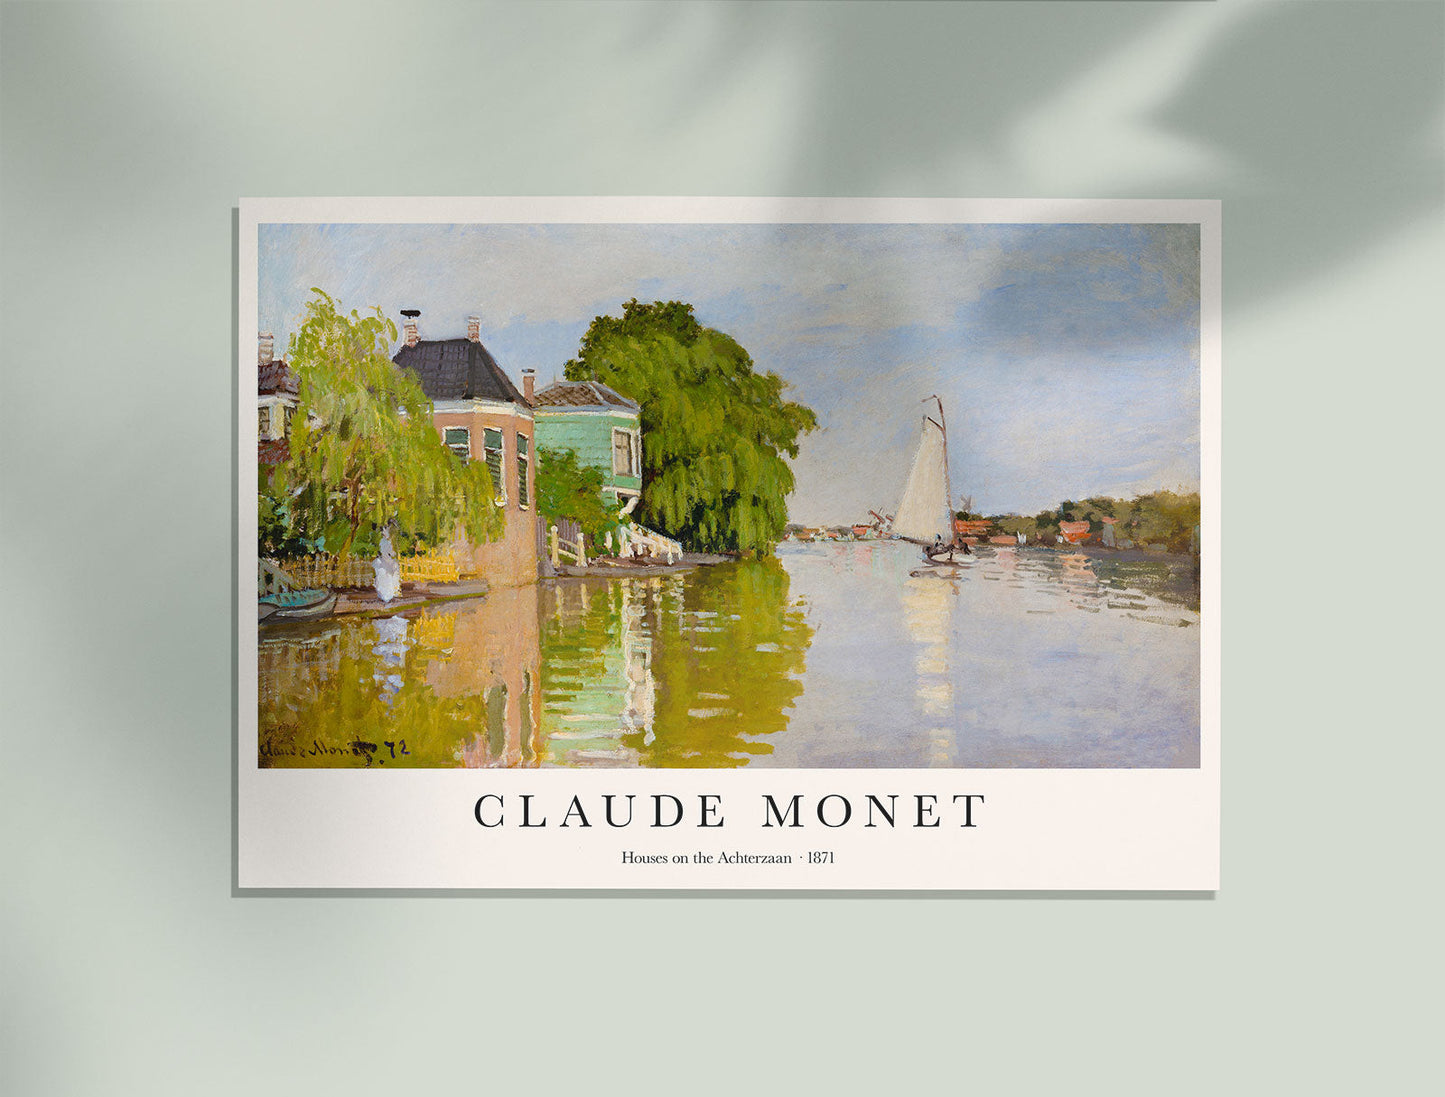 Houses on the Achterzaan by Claude Monet Art Exhibition Poster